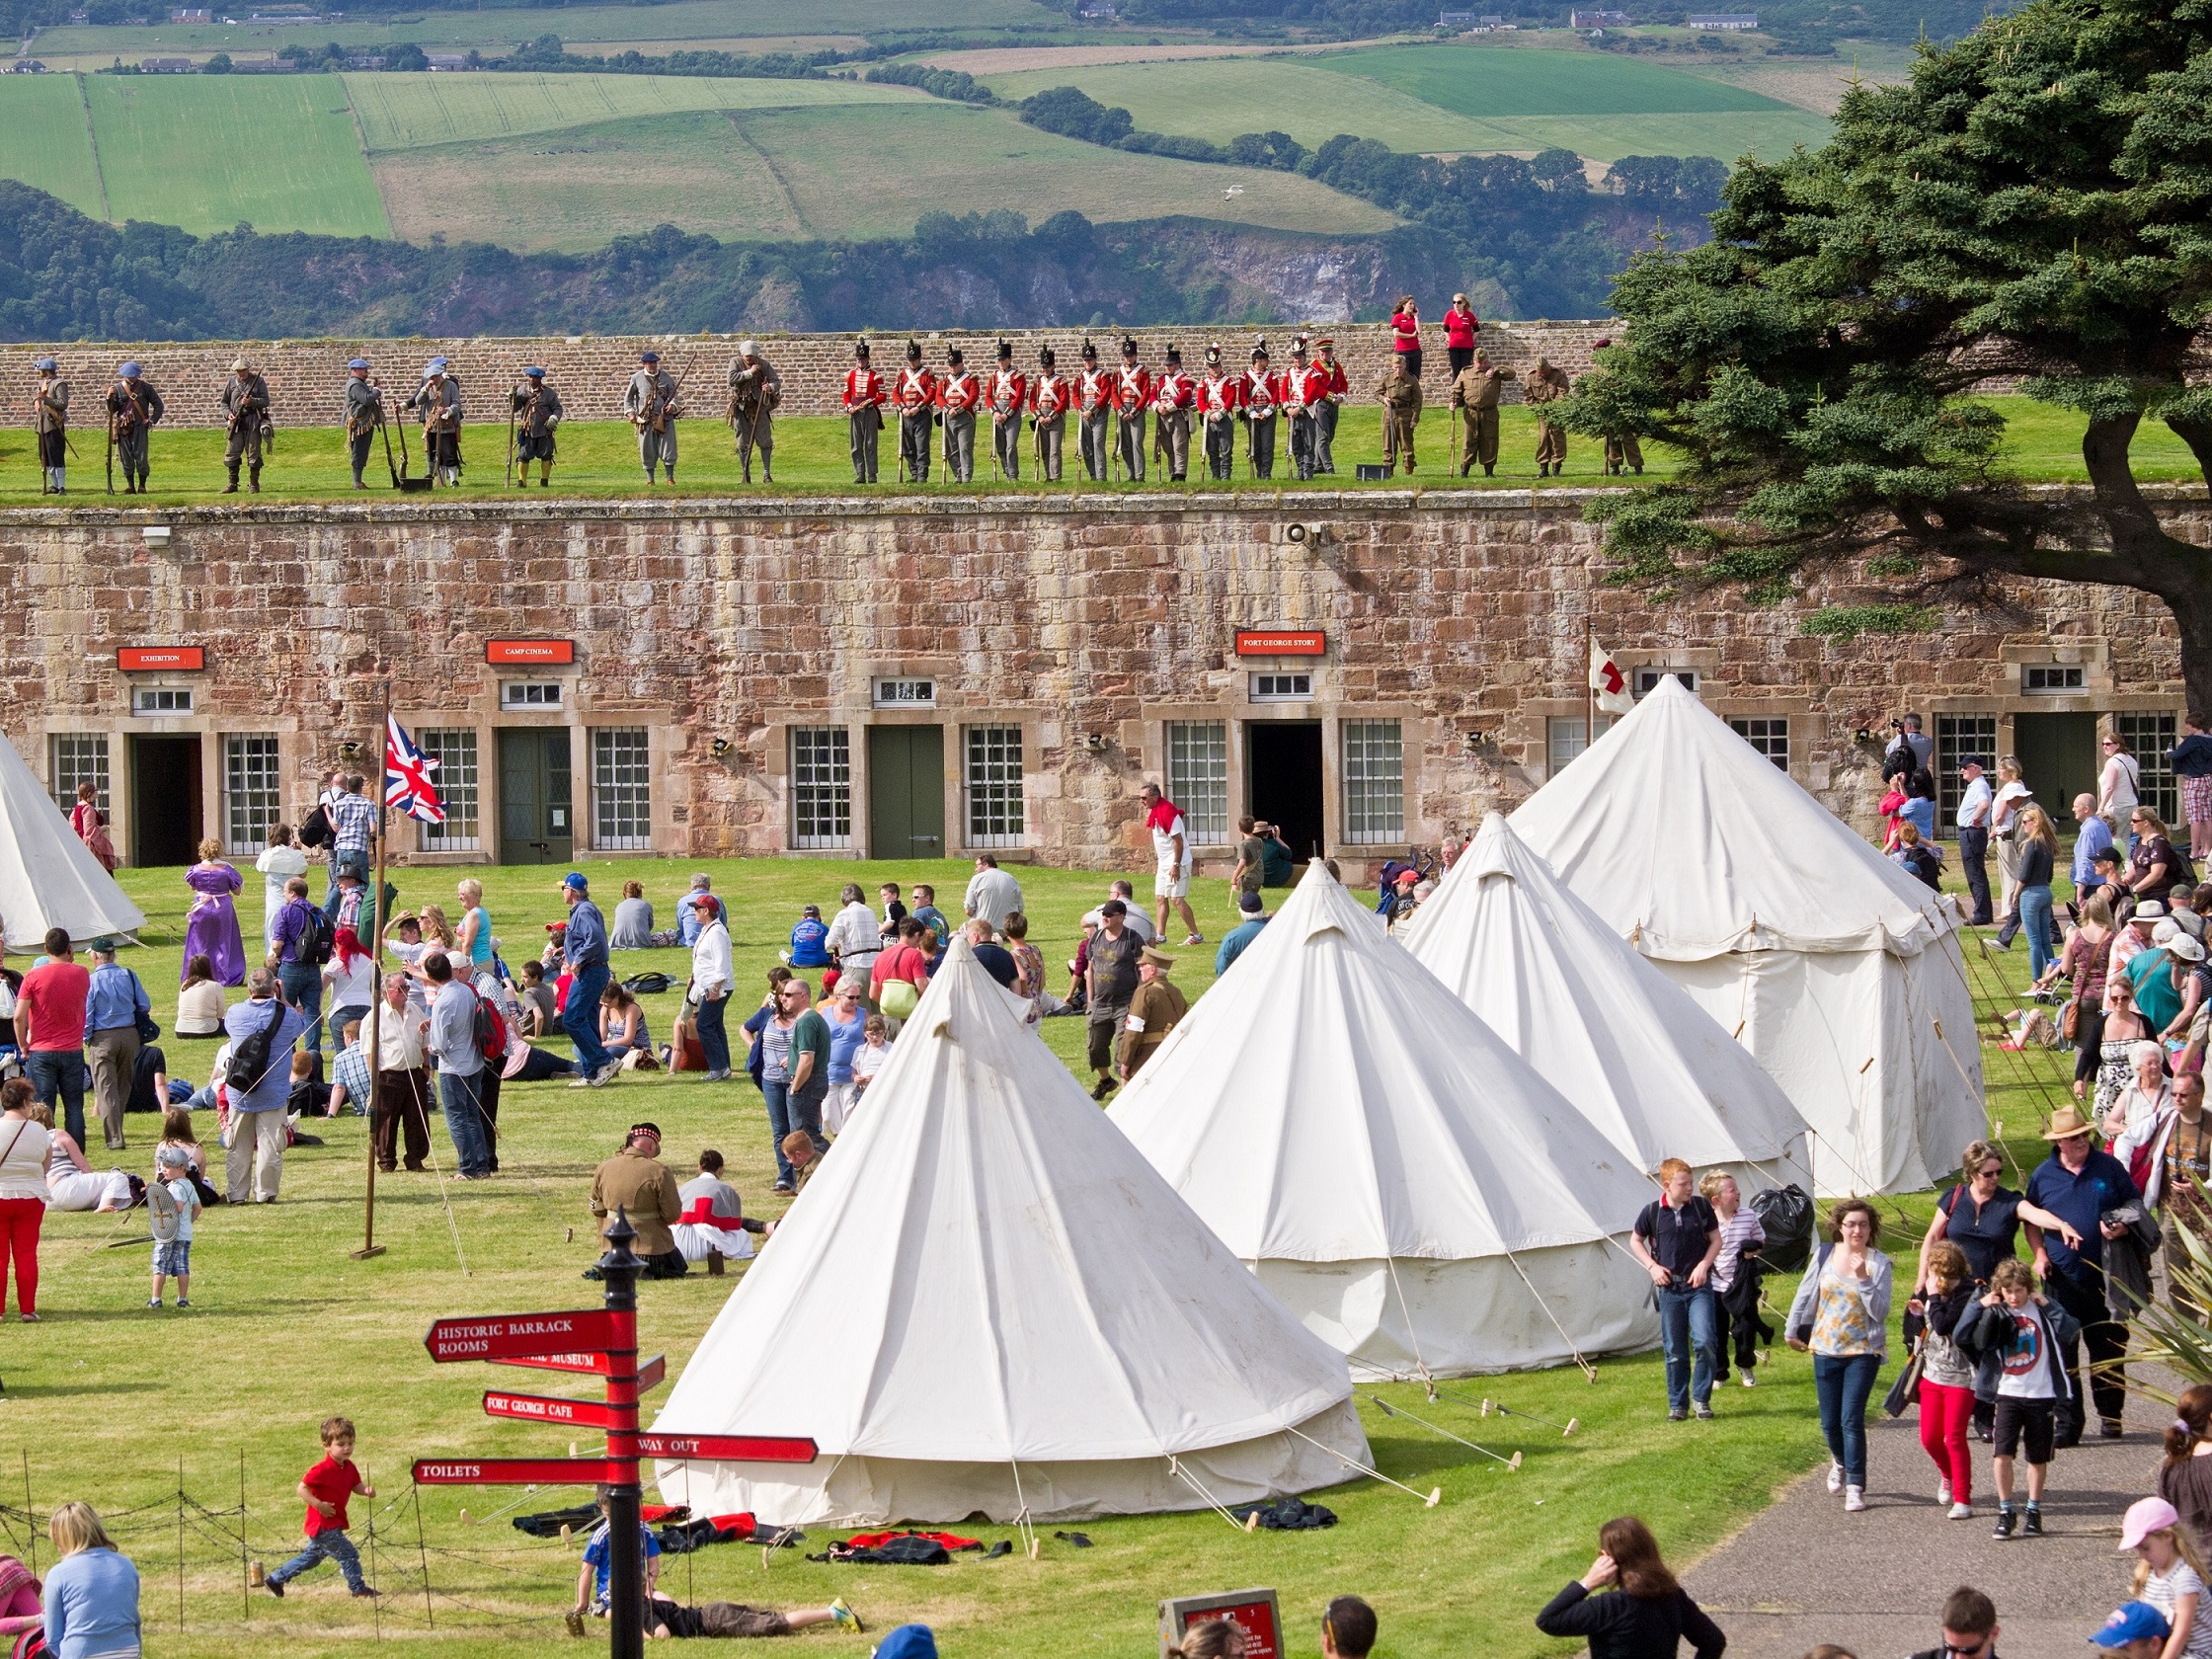 View over the tents at Fort George for the Celebration of the Centuries event at Fort George.